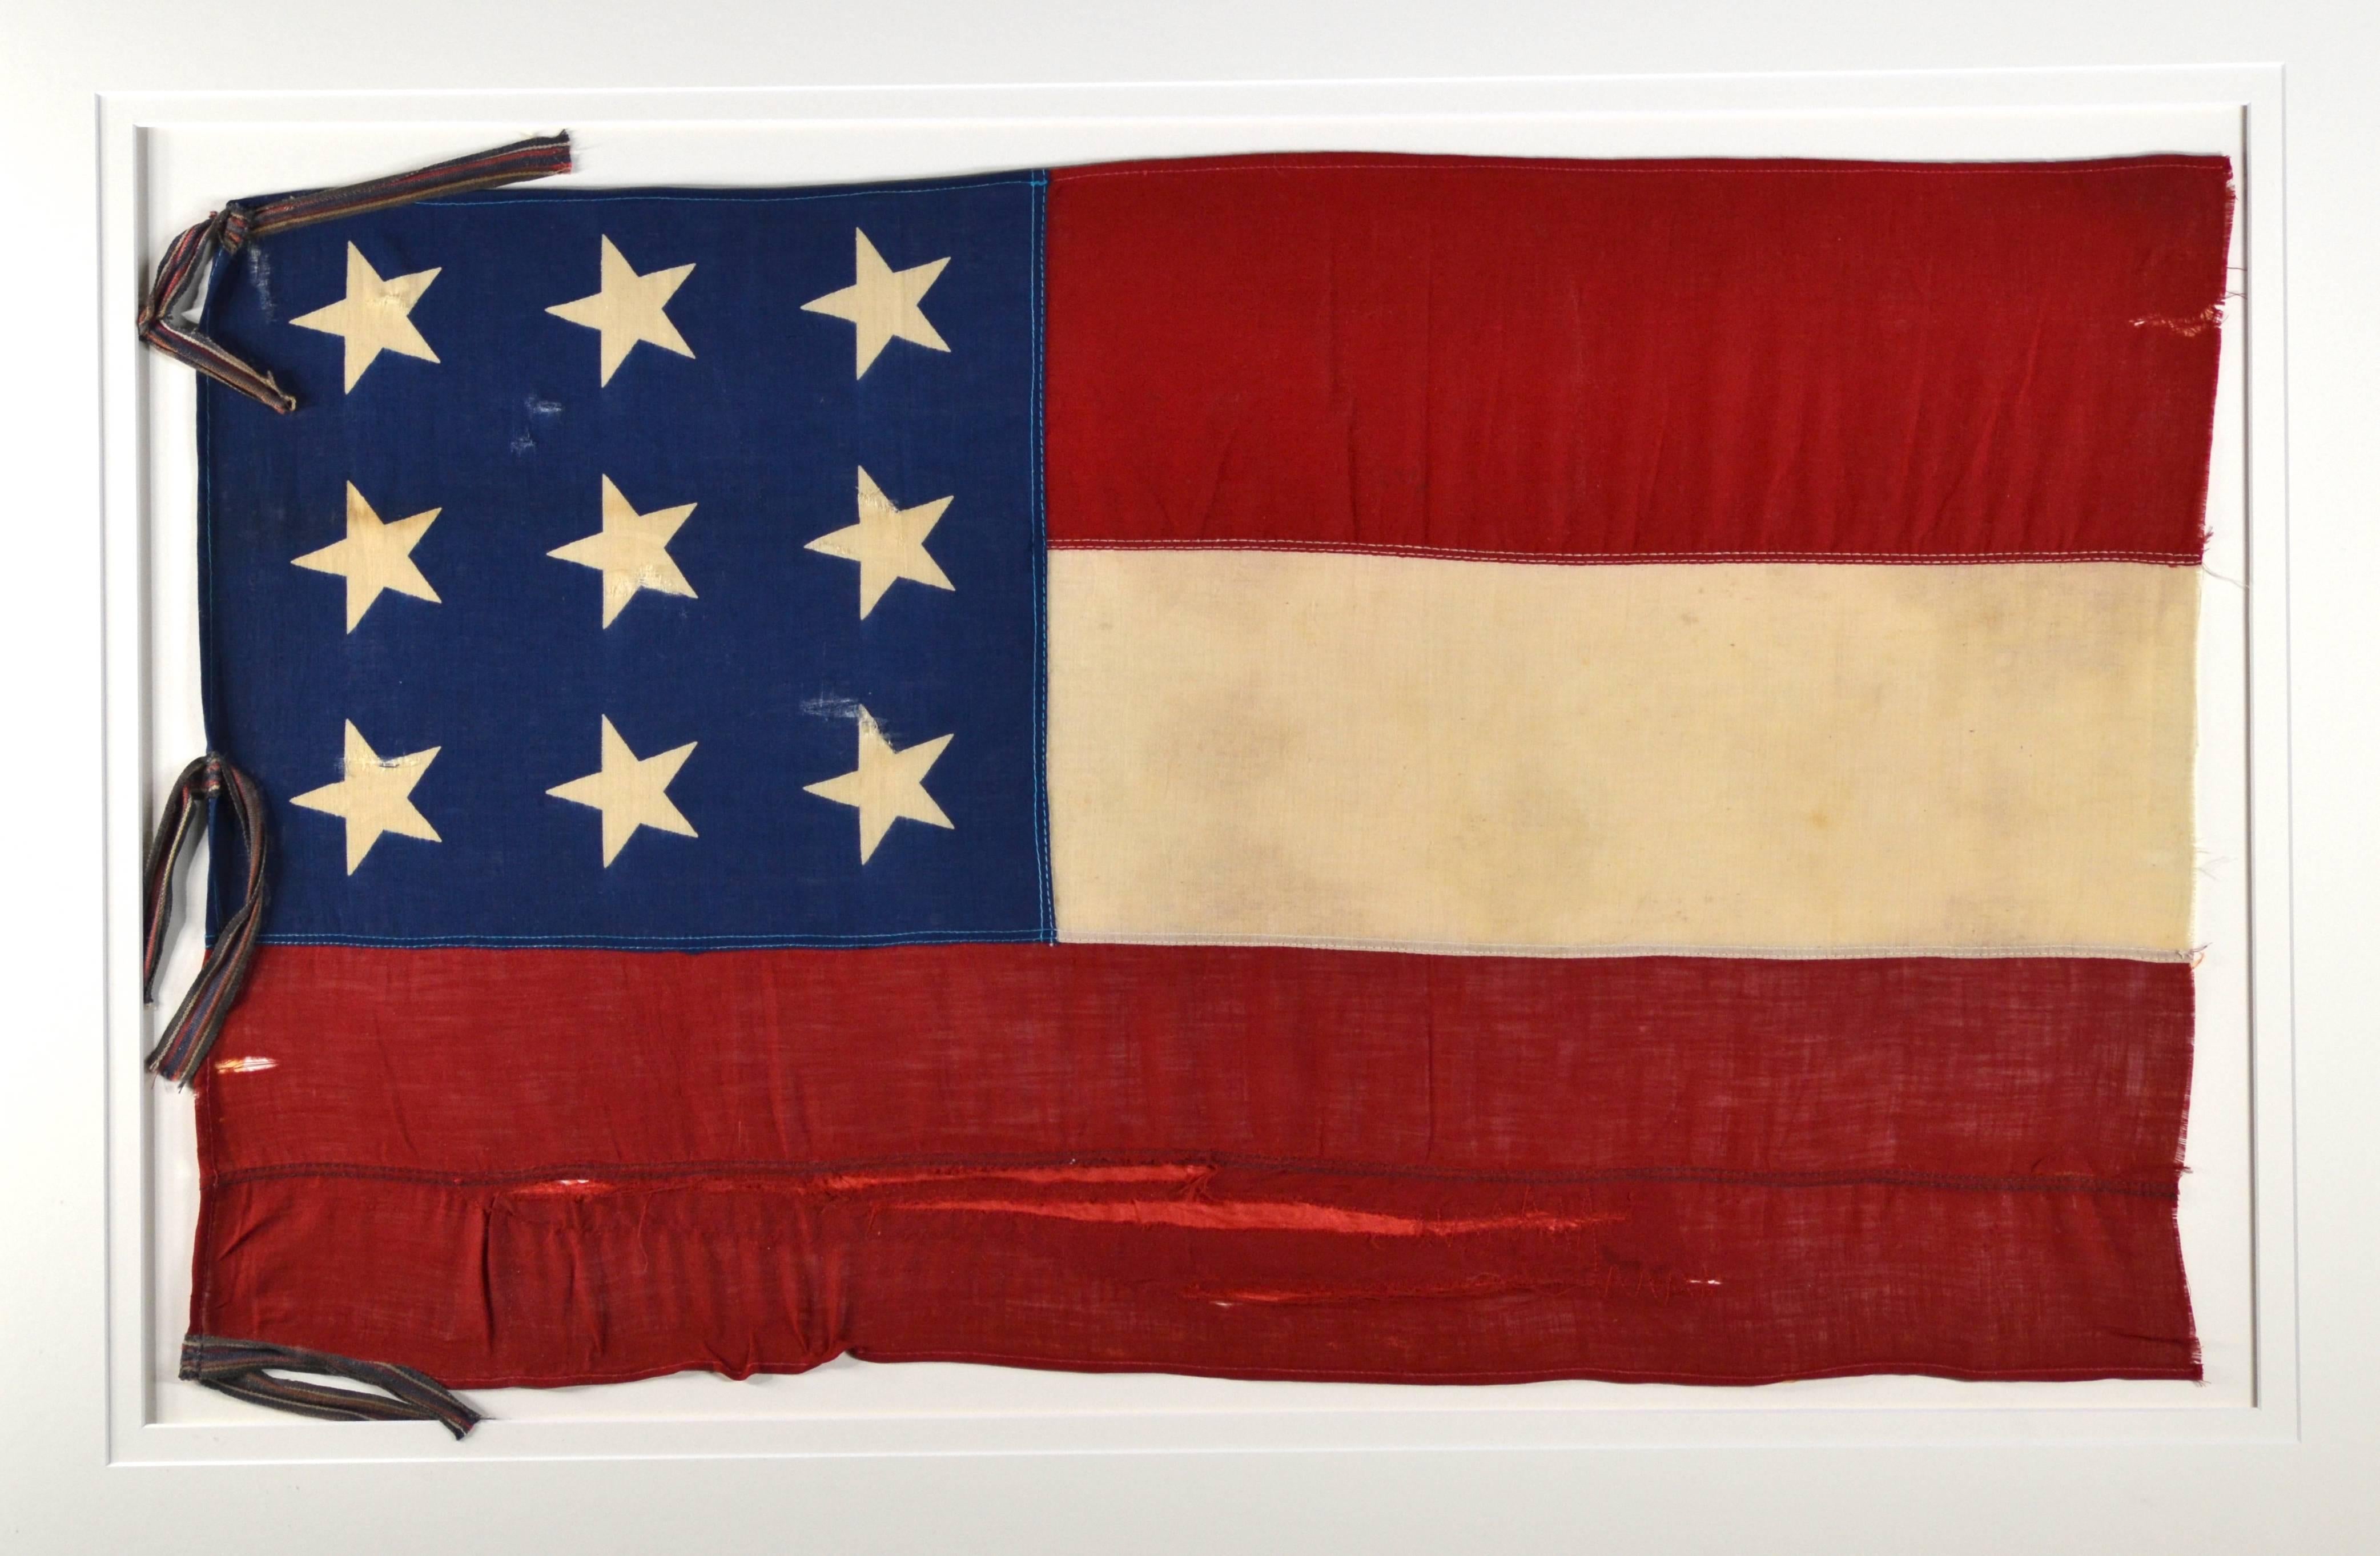 Rare nine star National flag banner from UCV. The UCV was the largest Civil War veterans organization founded around 1875 to help the Confederate Civil War veterans recover from the war. They provided, food, medical attention and support. This